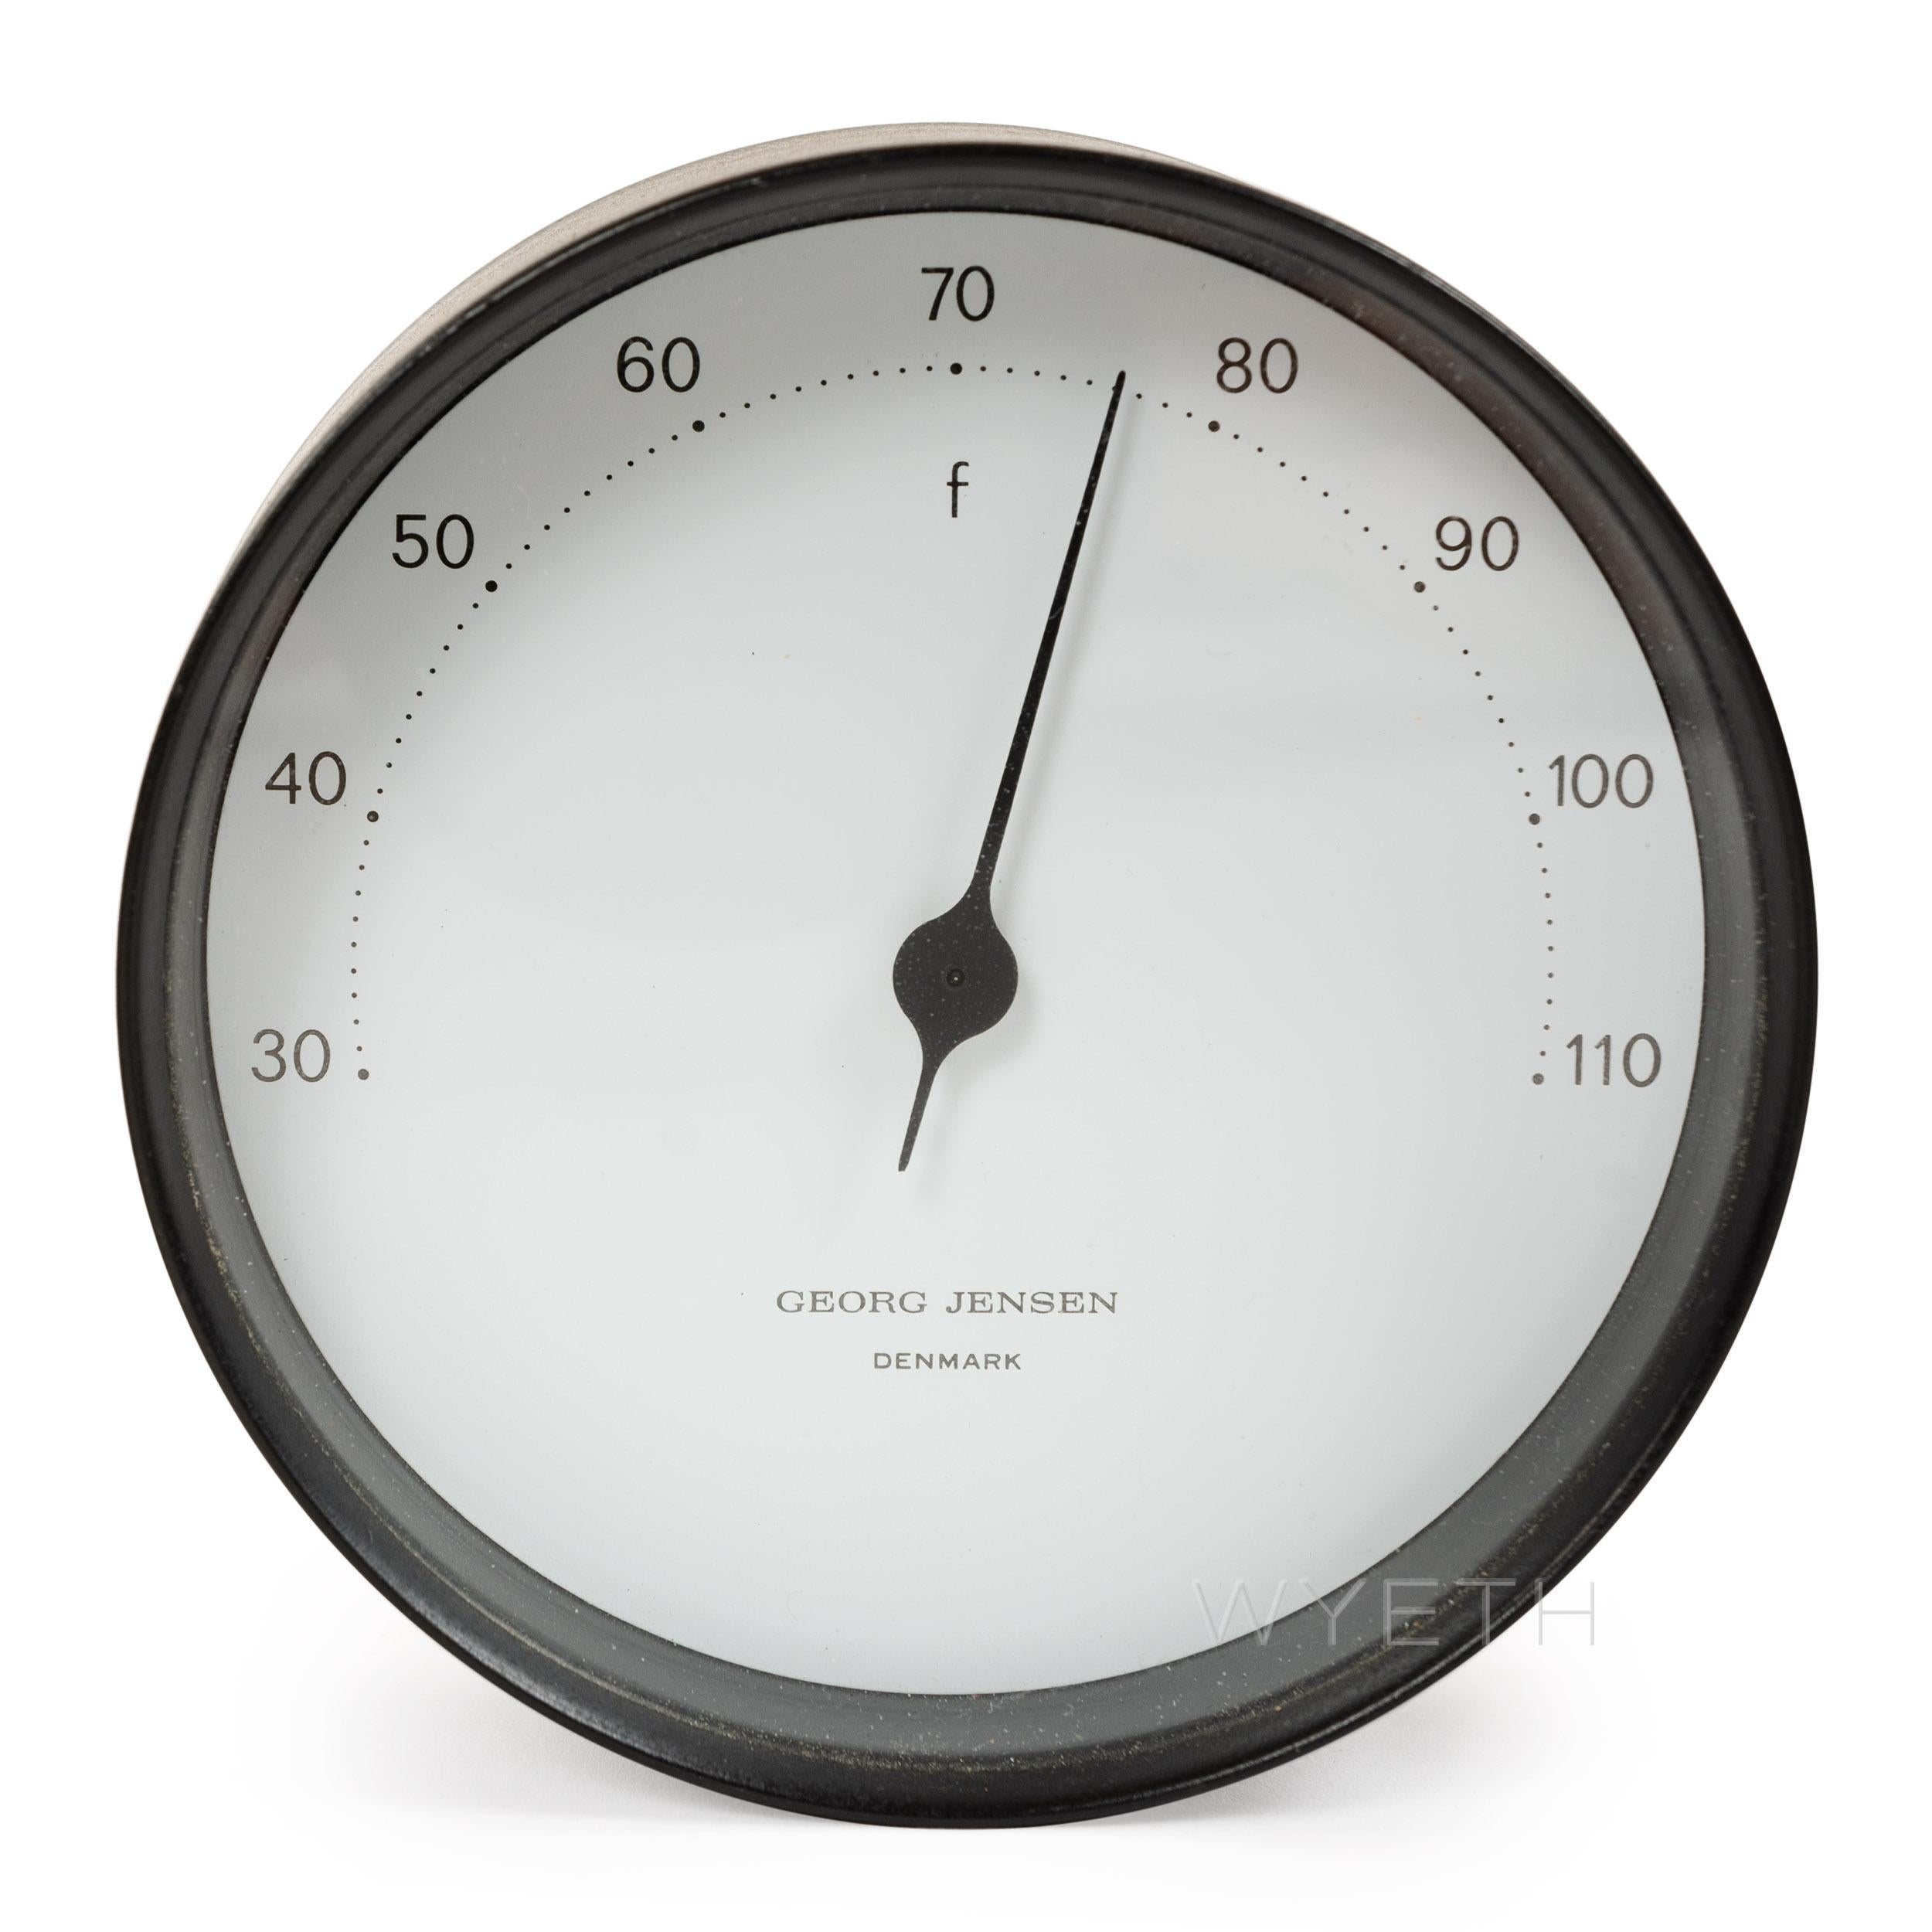 georg jensen clock and weather stations